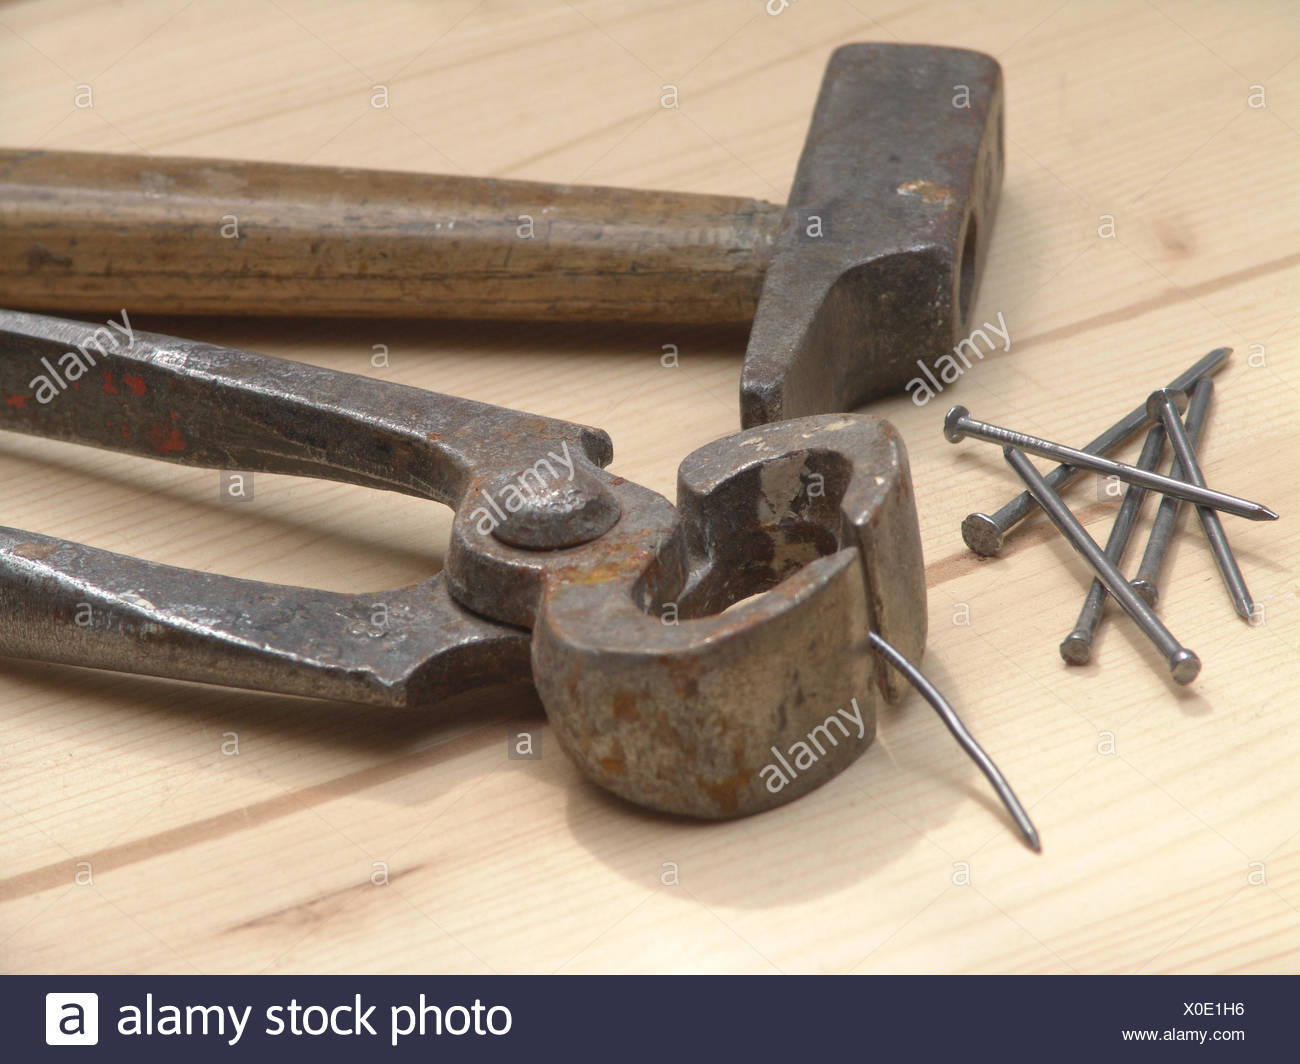 hammer and tongs Stock Photo: 275674482 - Alamy